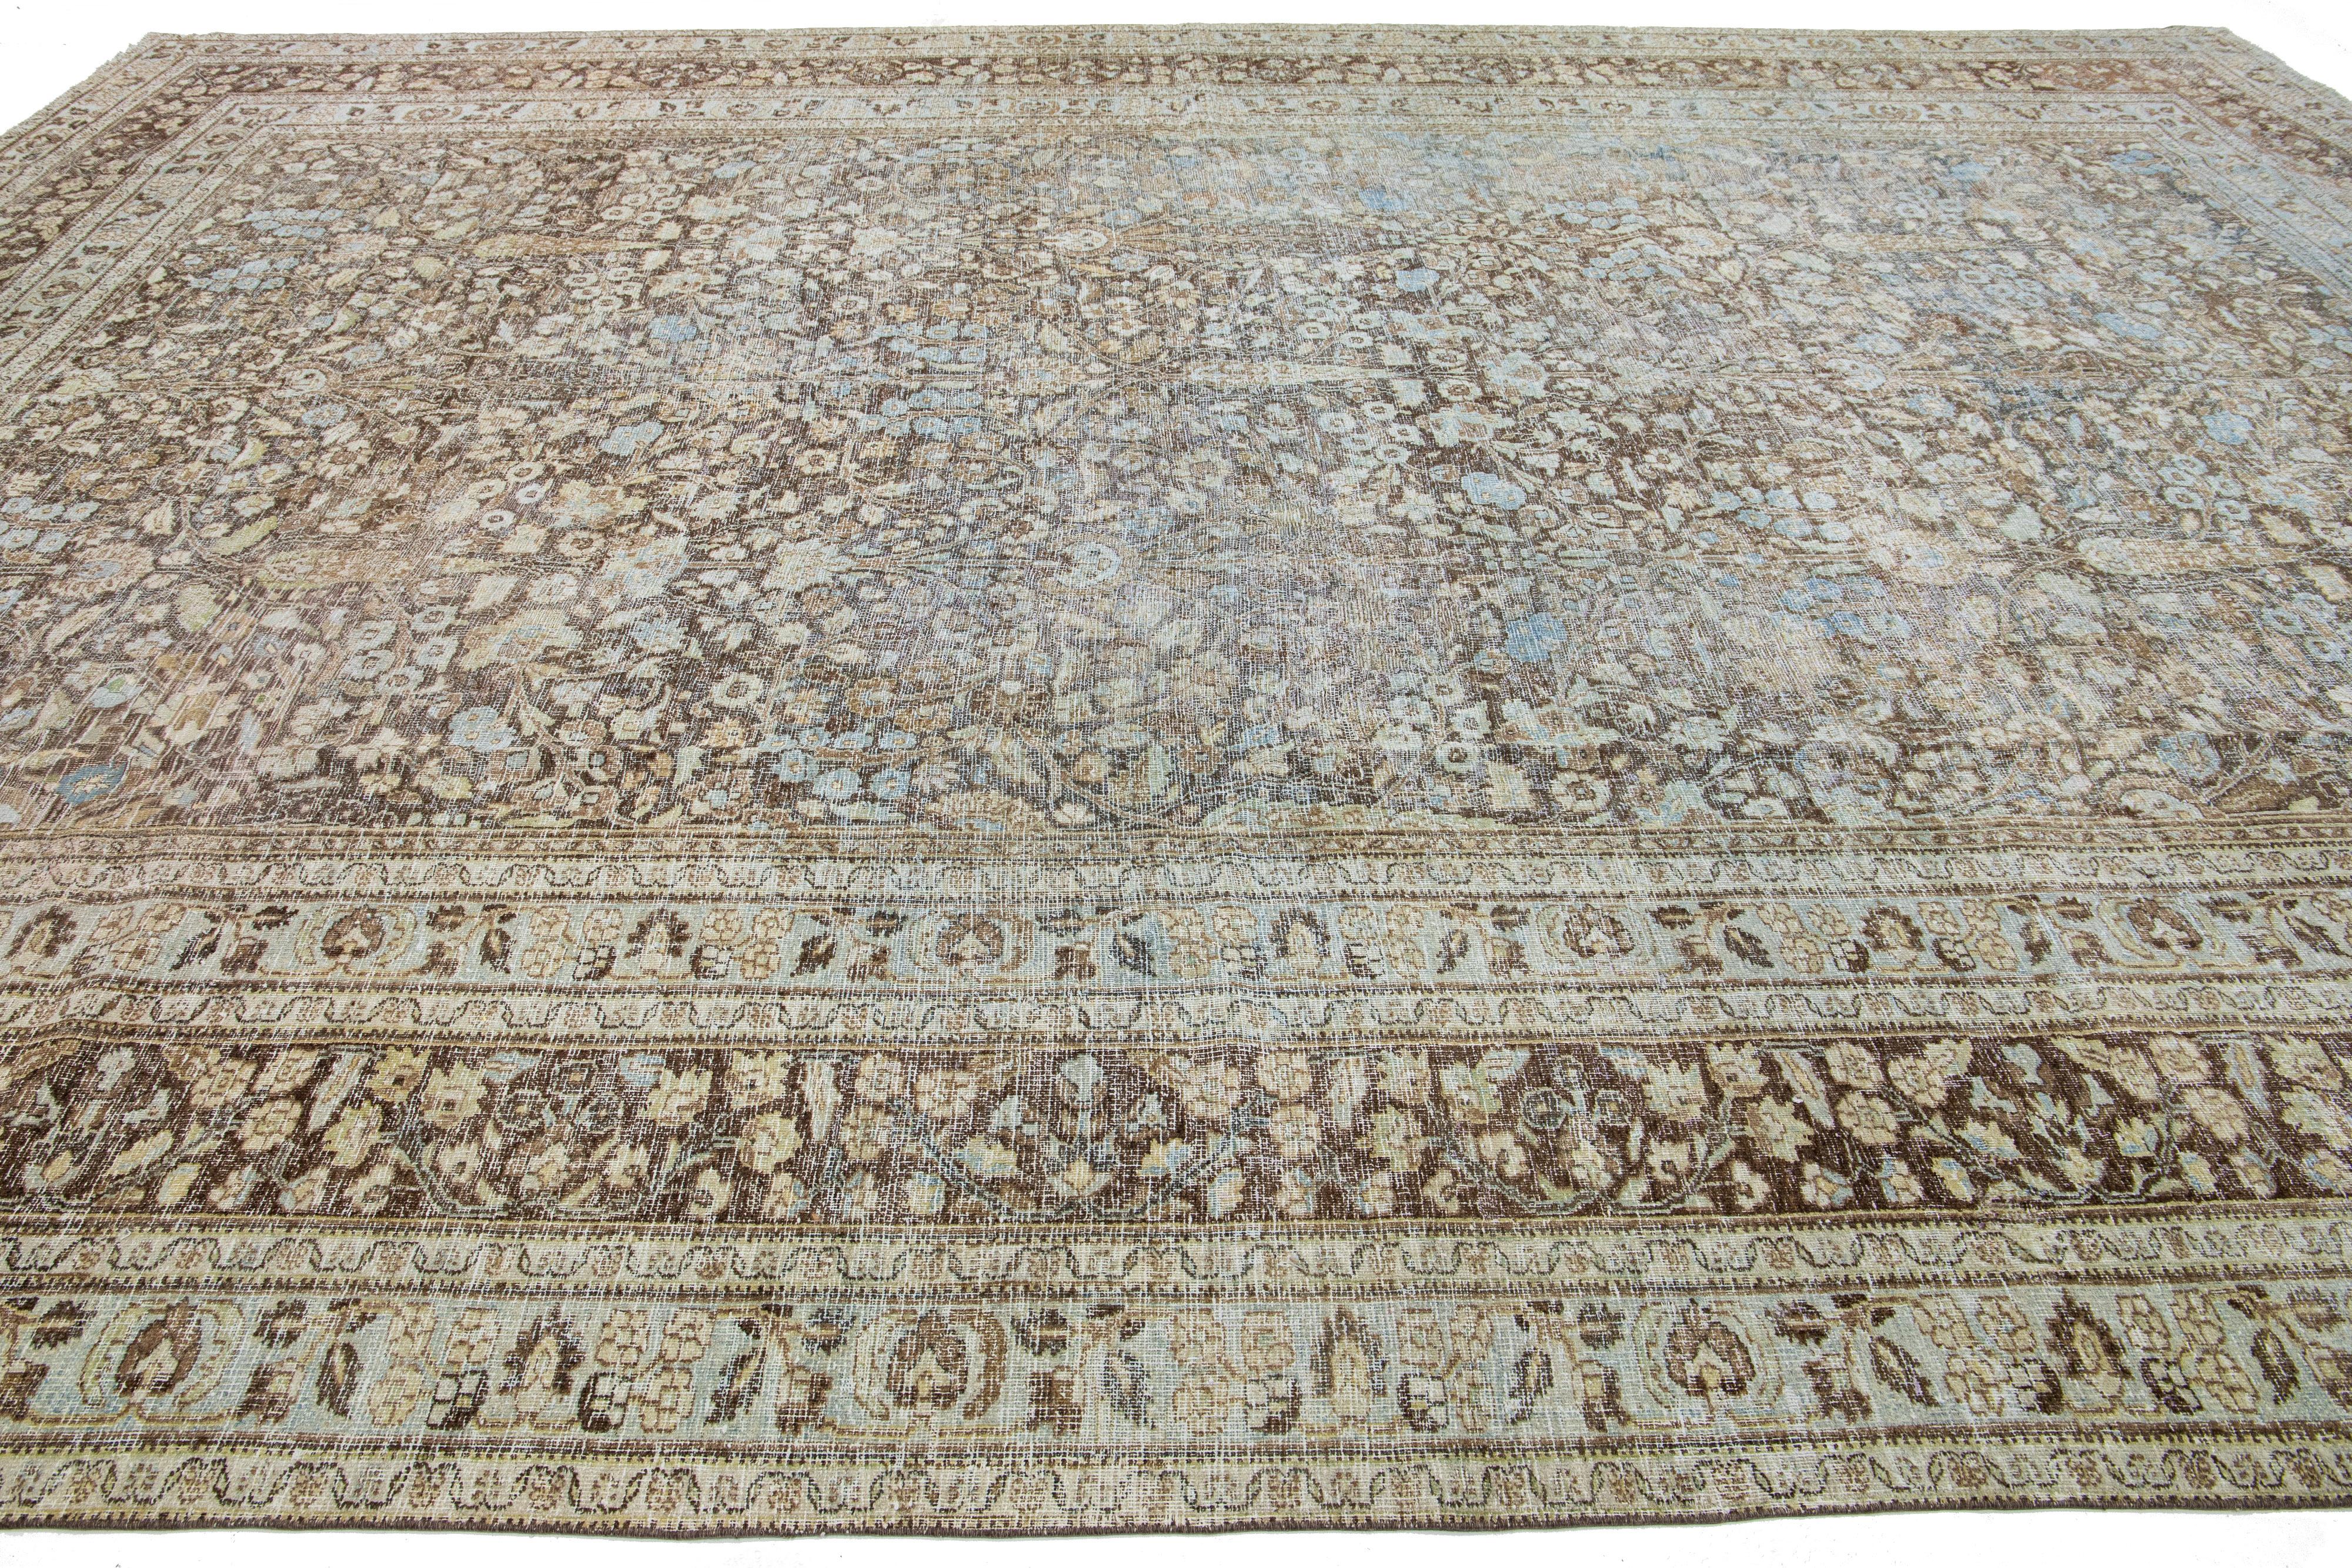 Oversize 1900's Persian Tabriz Wool Rug In Brown With Allover Floral Pattern In Good Condition For Sale In Norwalk, CT